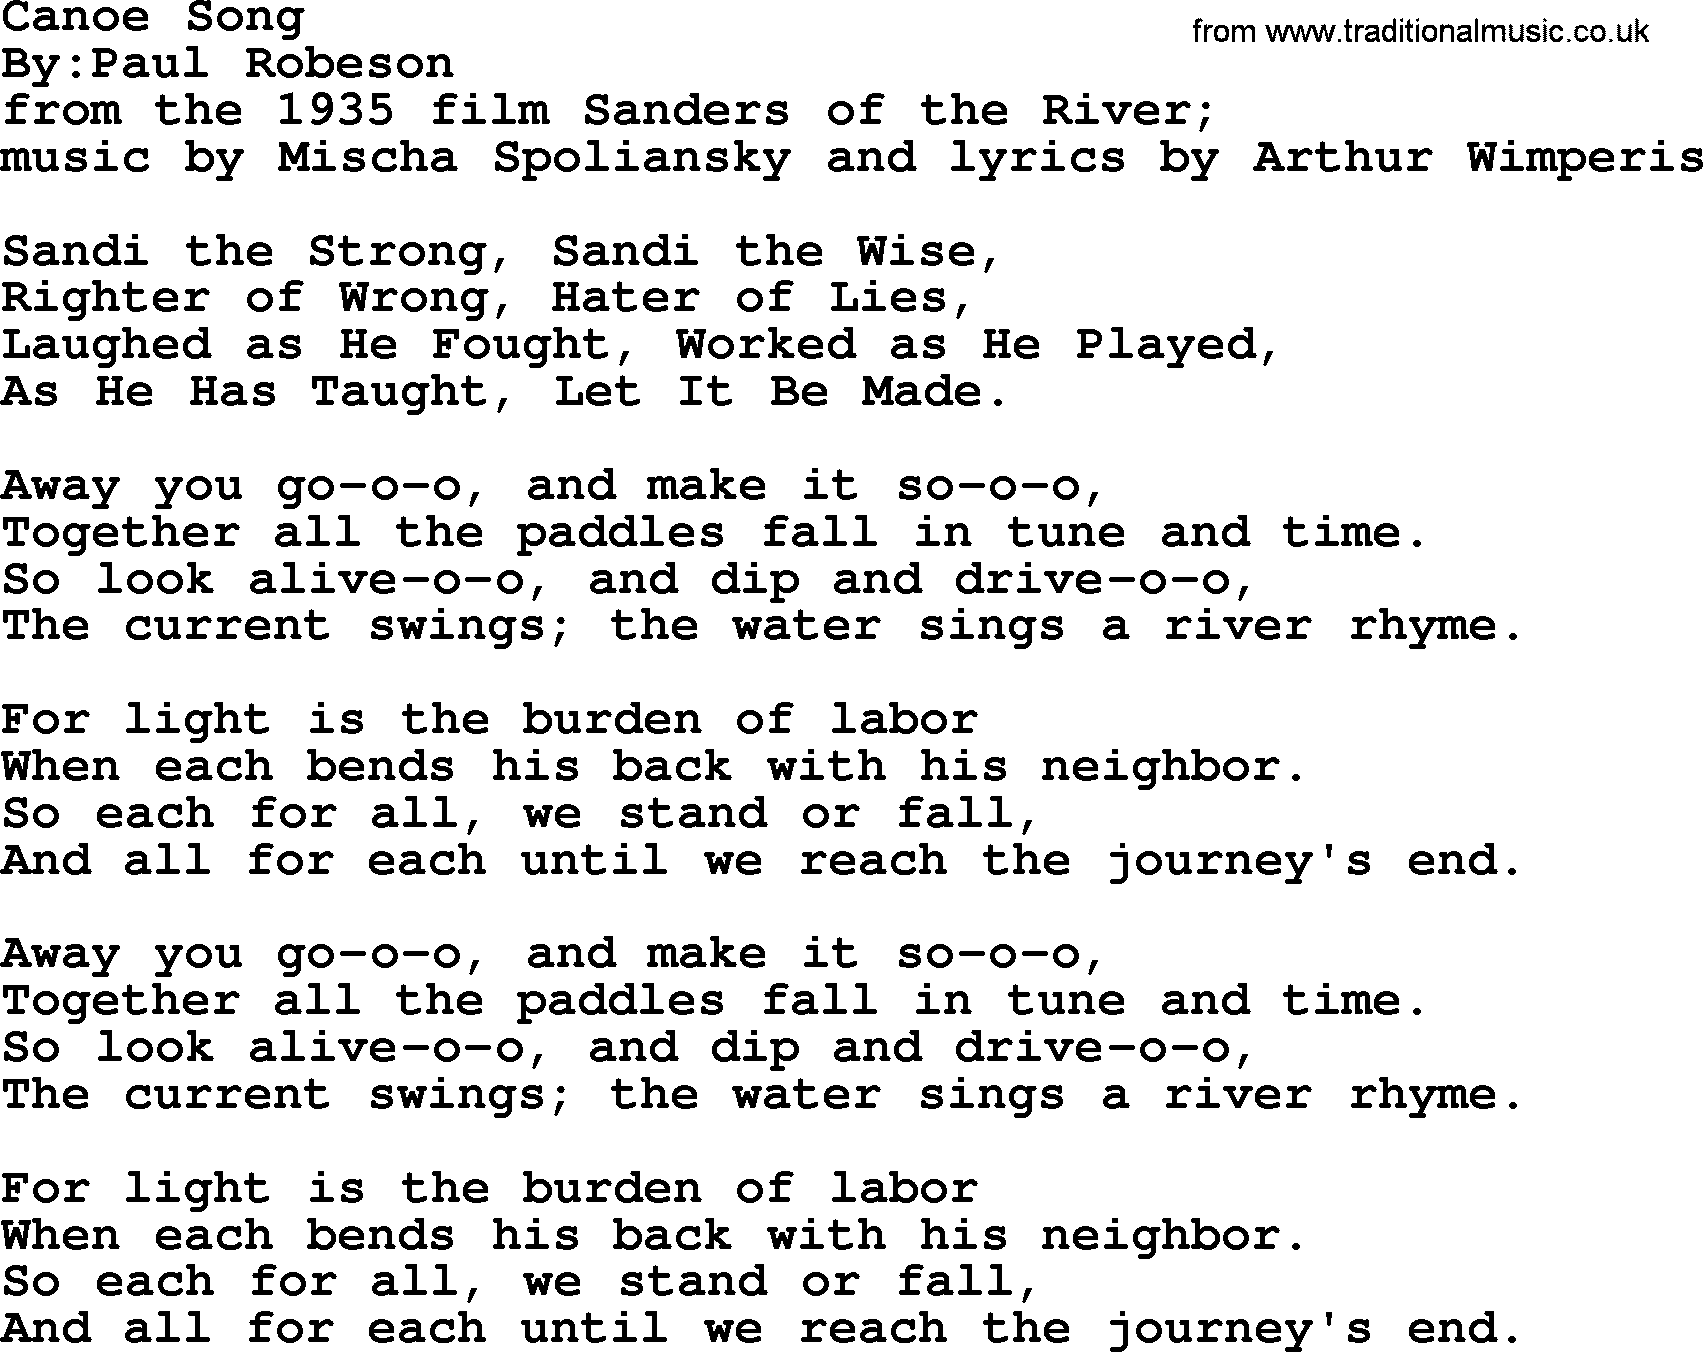 Political, Solidarity, Workers or Union song: Canoe Song, lyrics